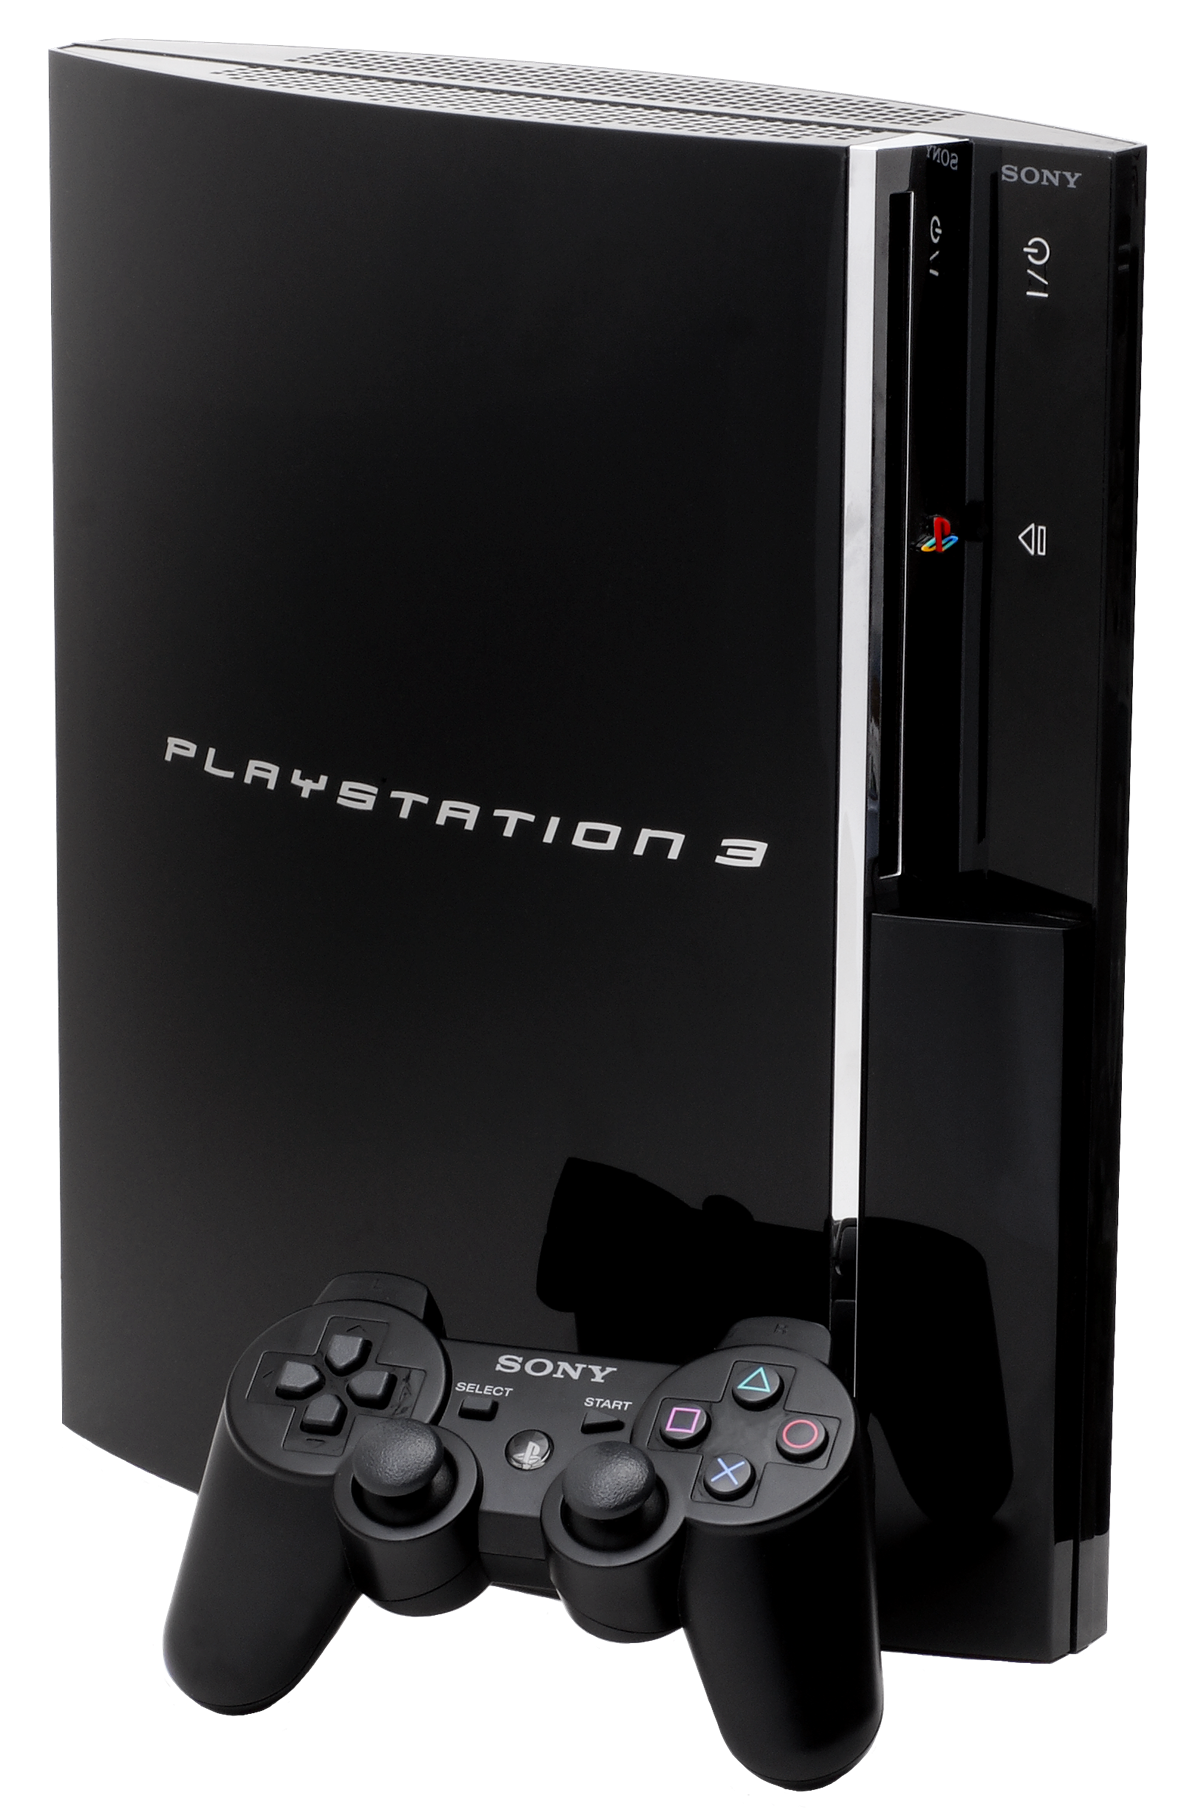 Sony PlayStation Transparent Image